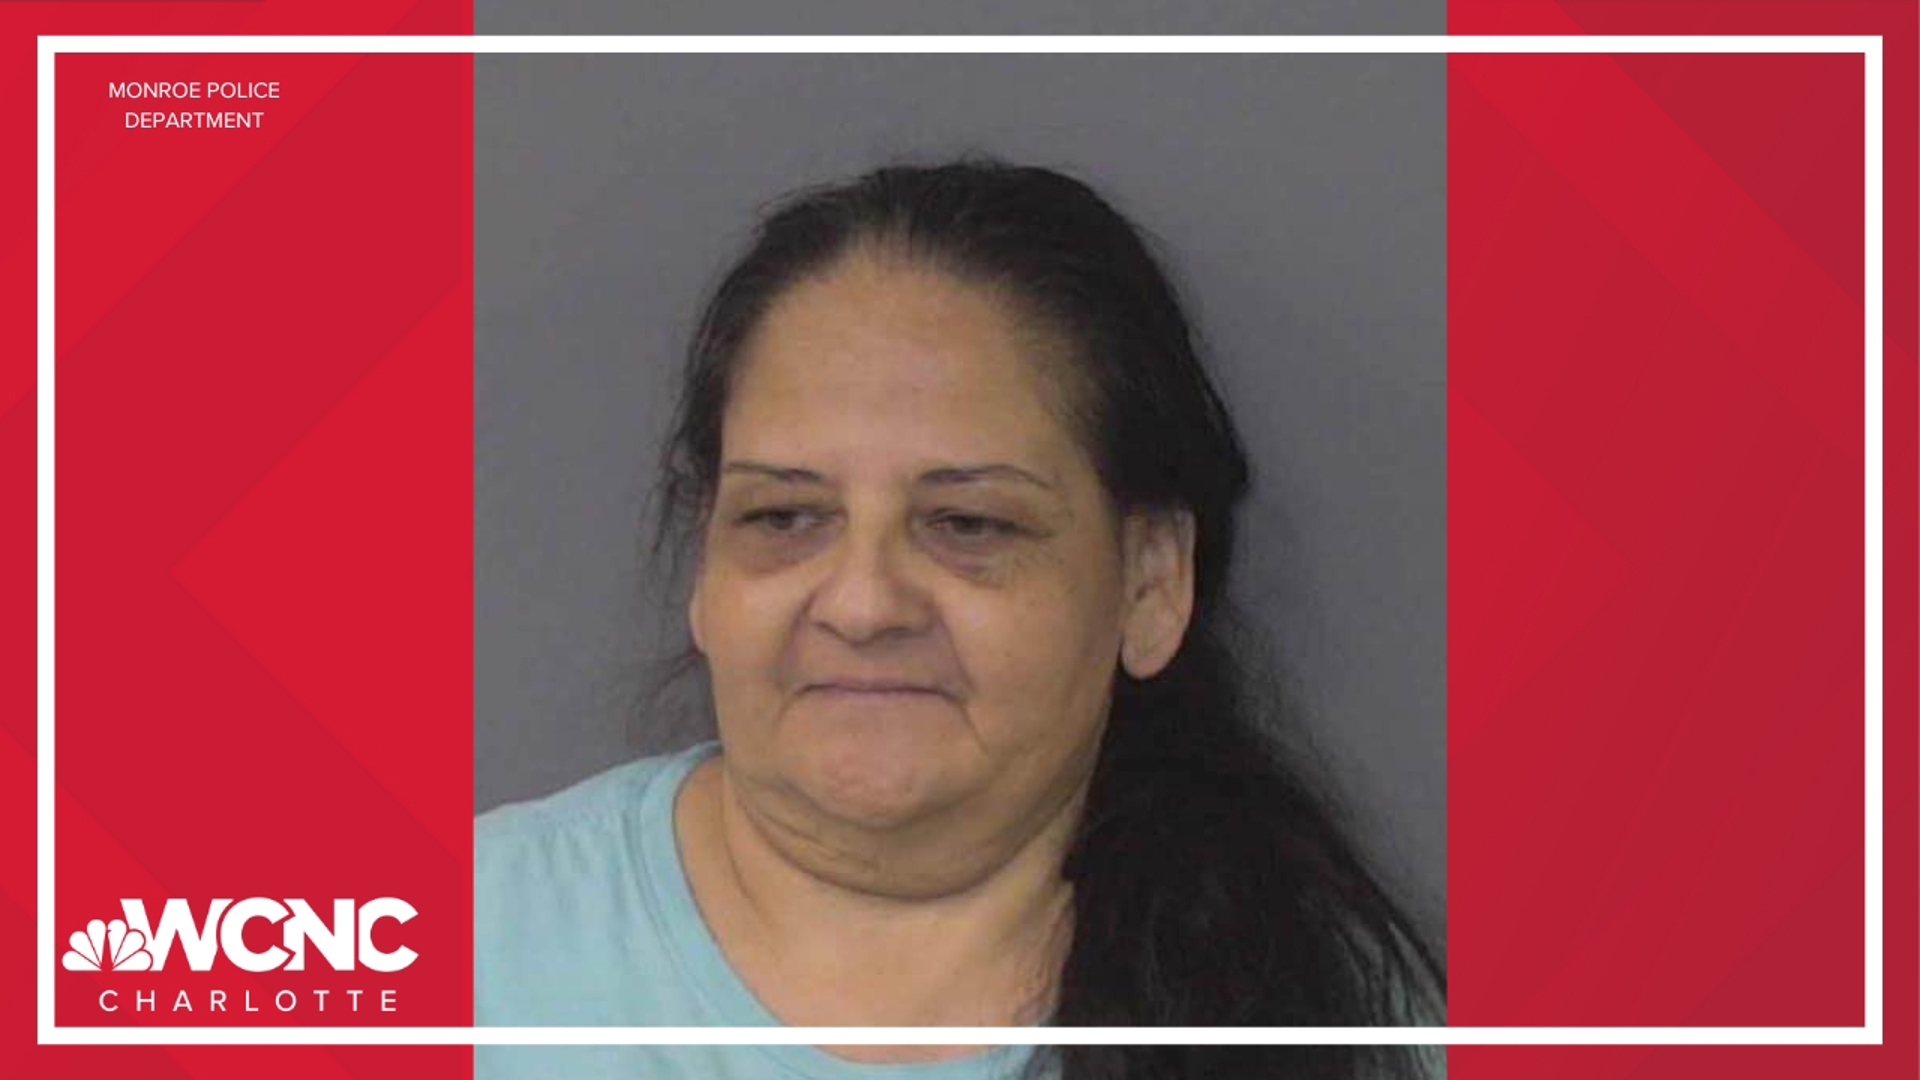 A woman who claimed a child she was watching was burned during an alleged robbery at a Monroe home is now accused of lying about the incident and has been arrested.